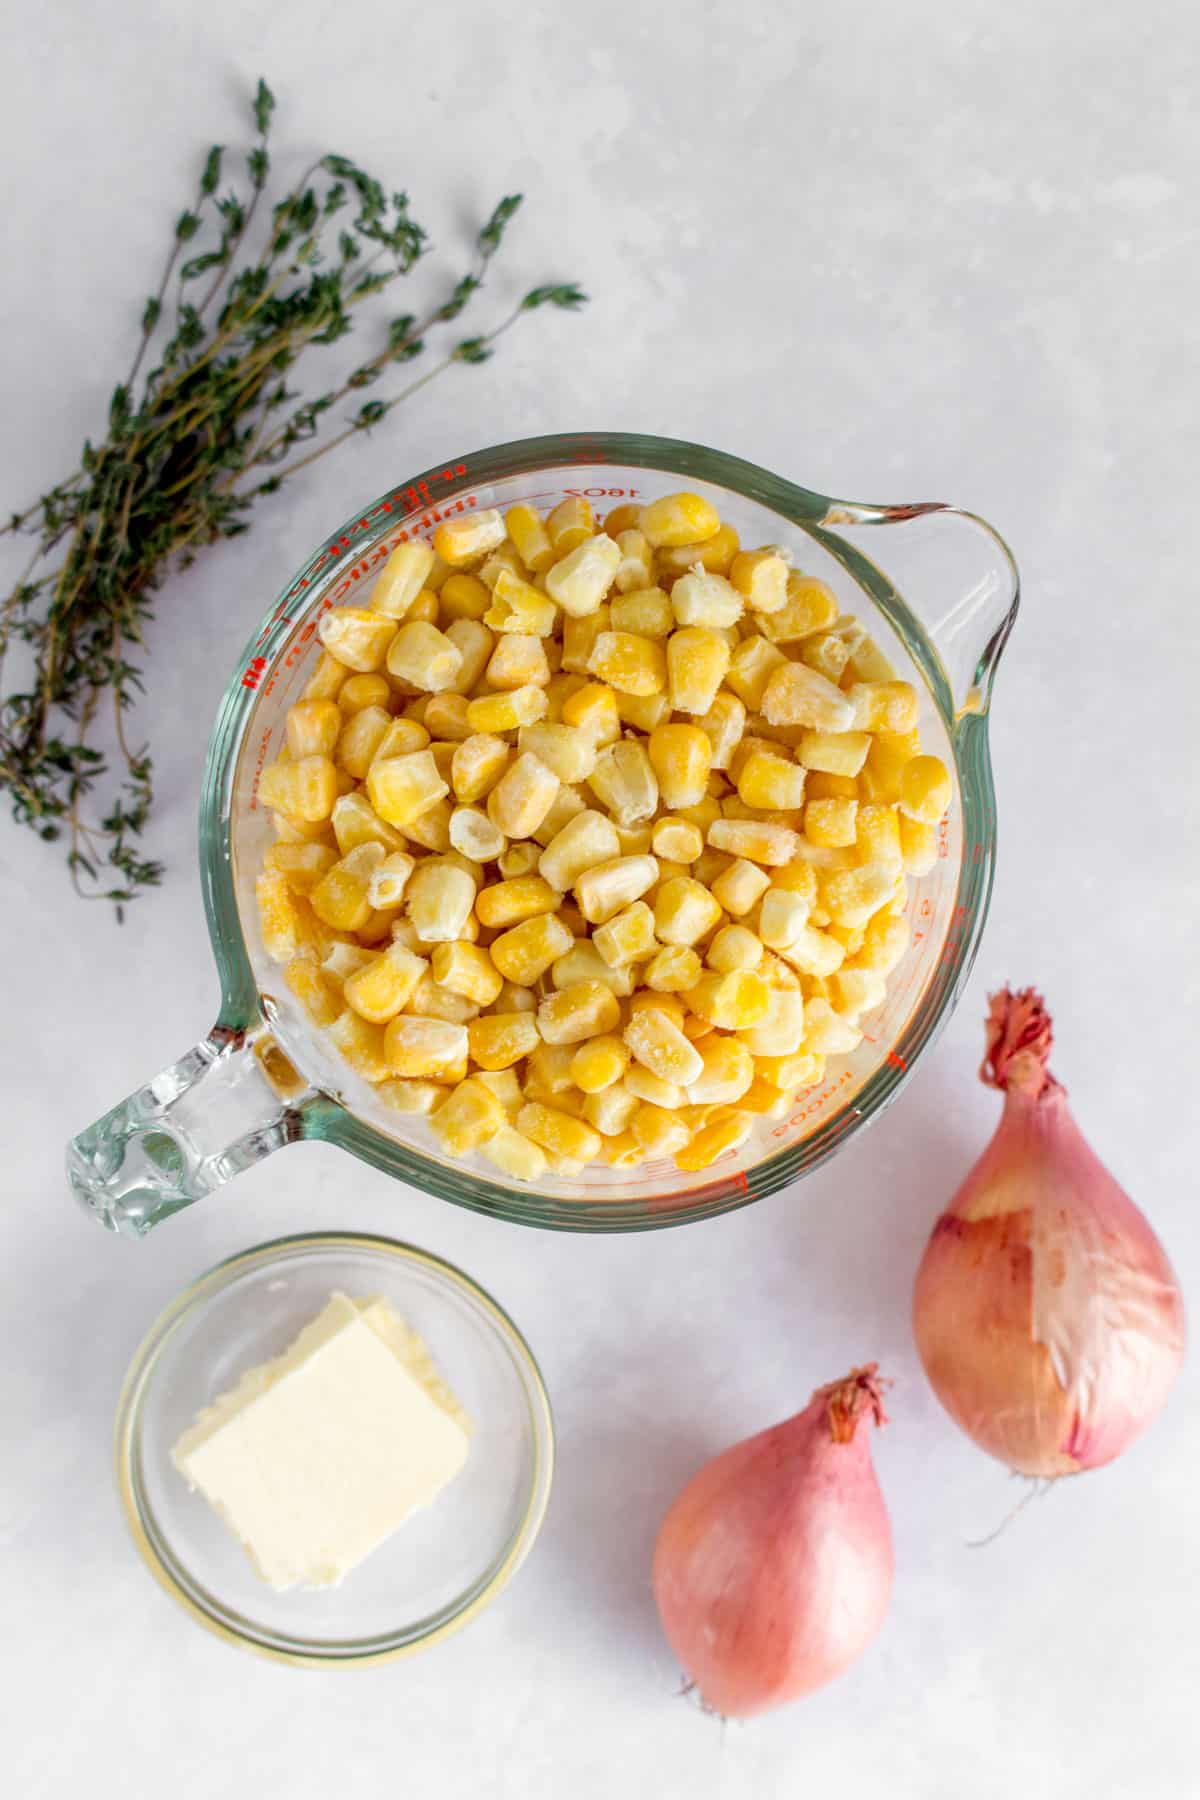 Ingredients for caramelized corn.